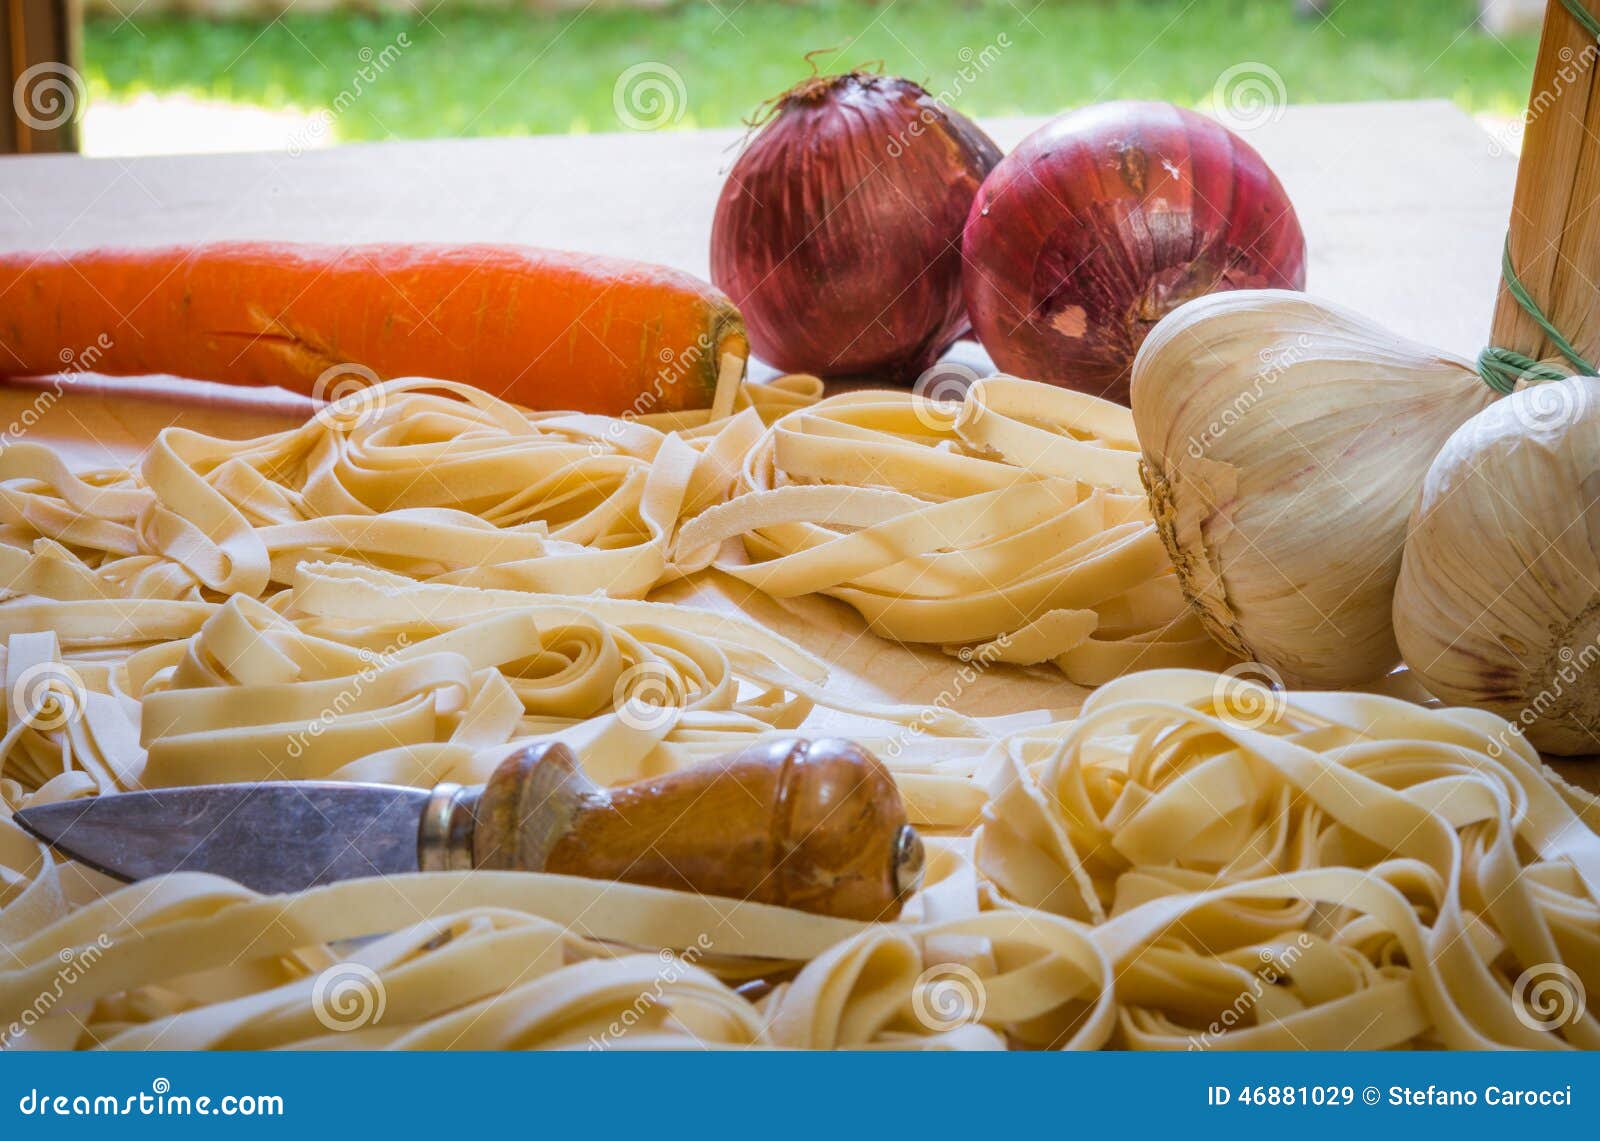 Pasta and Ingradient. Fettuccine or tagliatelle cut ready to cook with vegetables